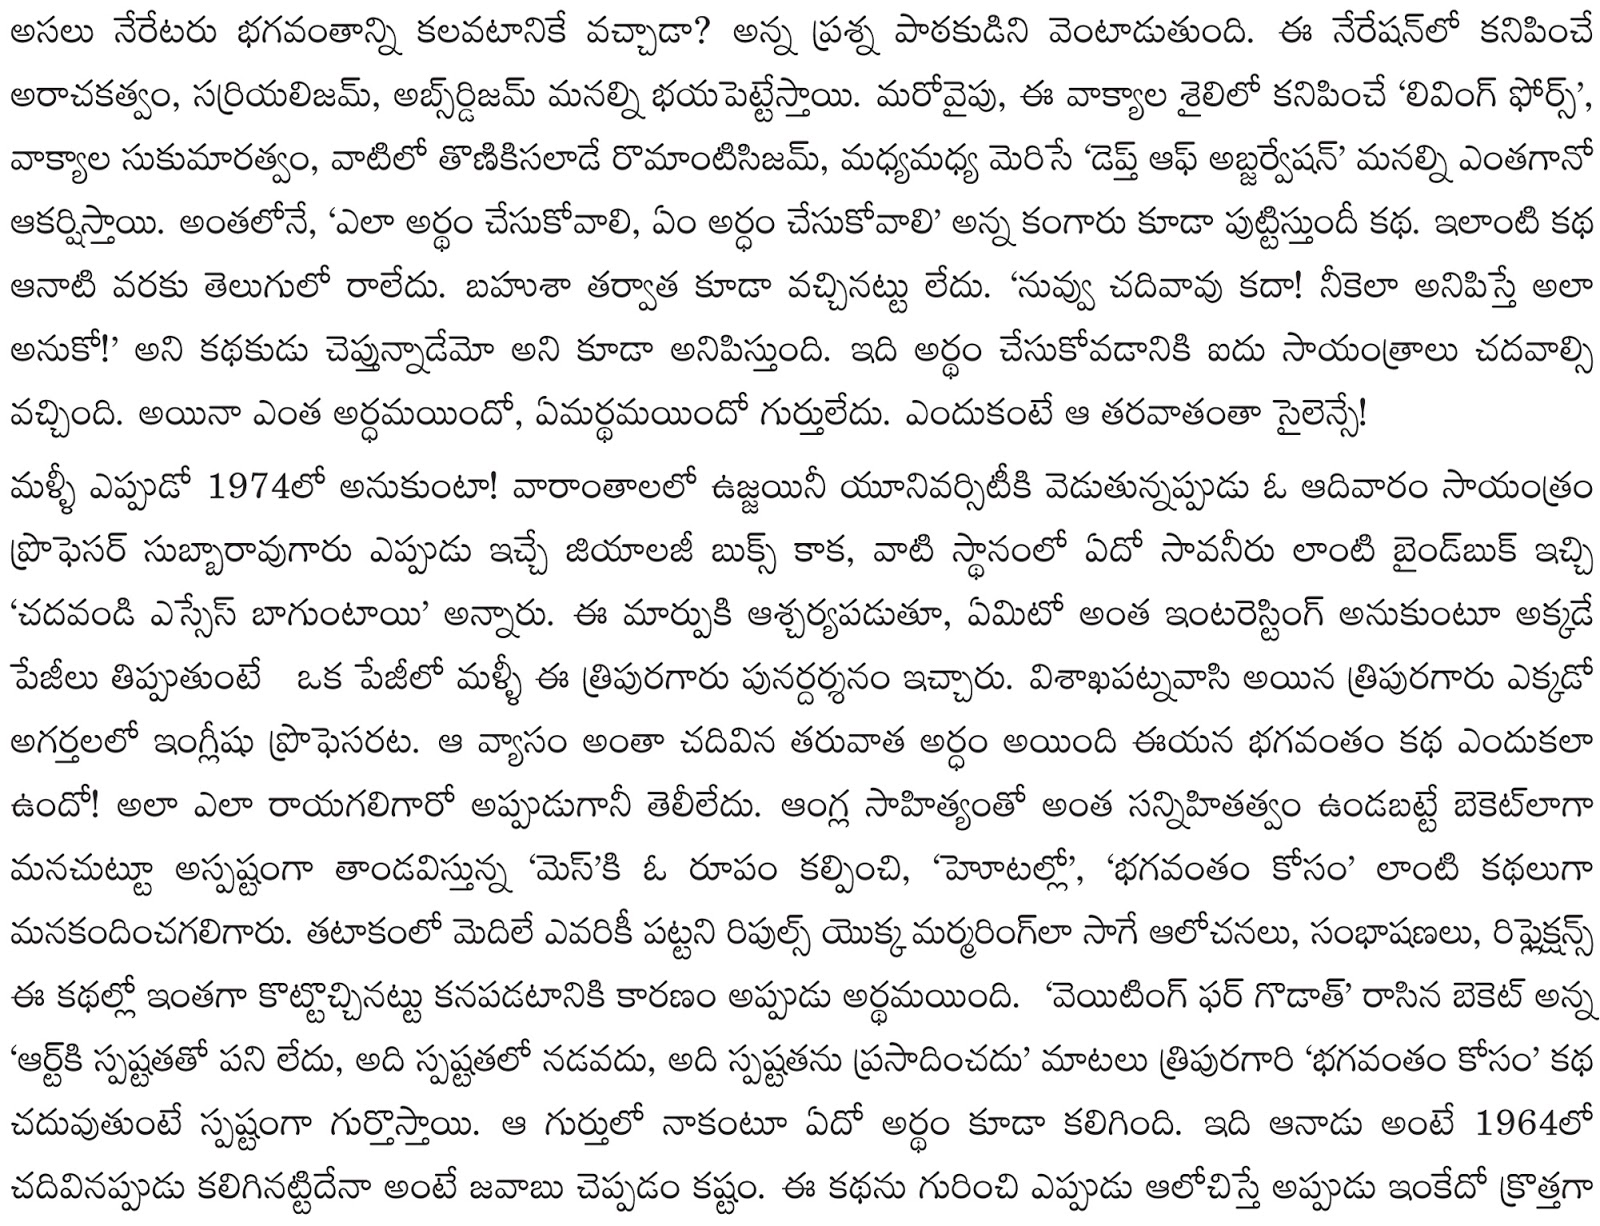 Essay about mother in telugu language india